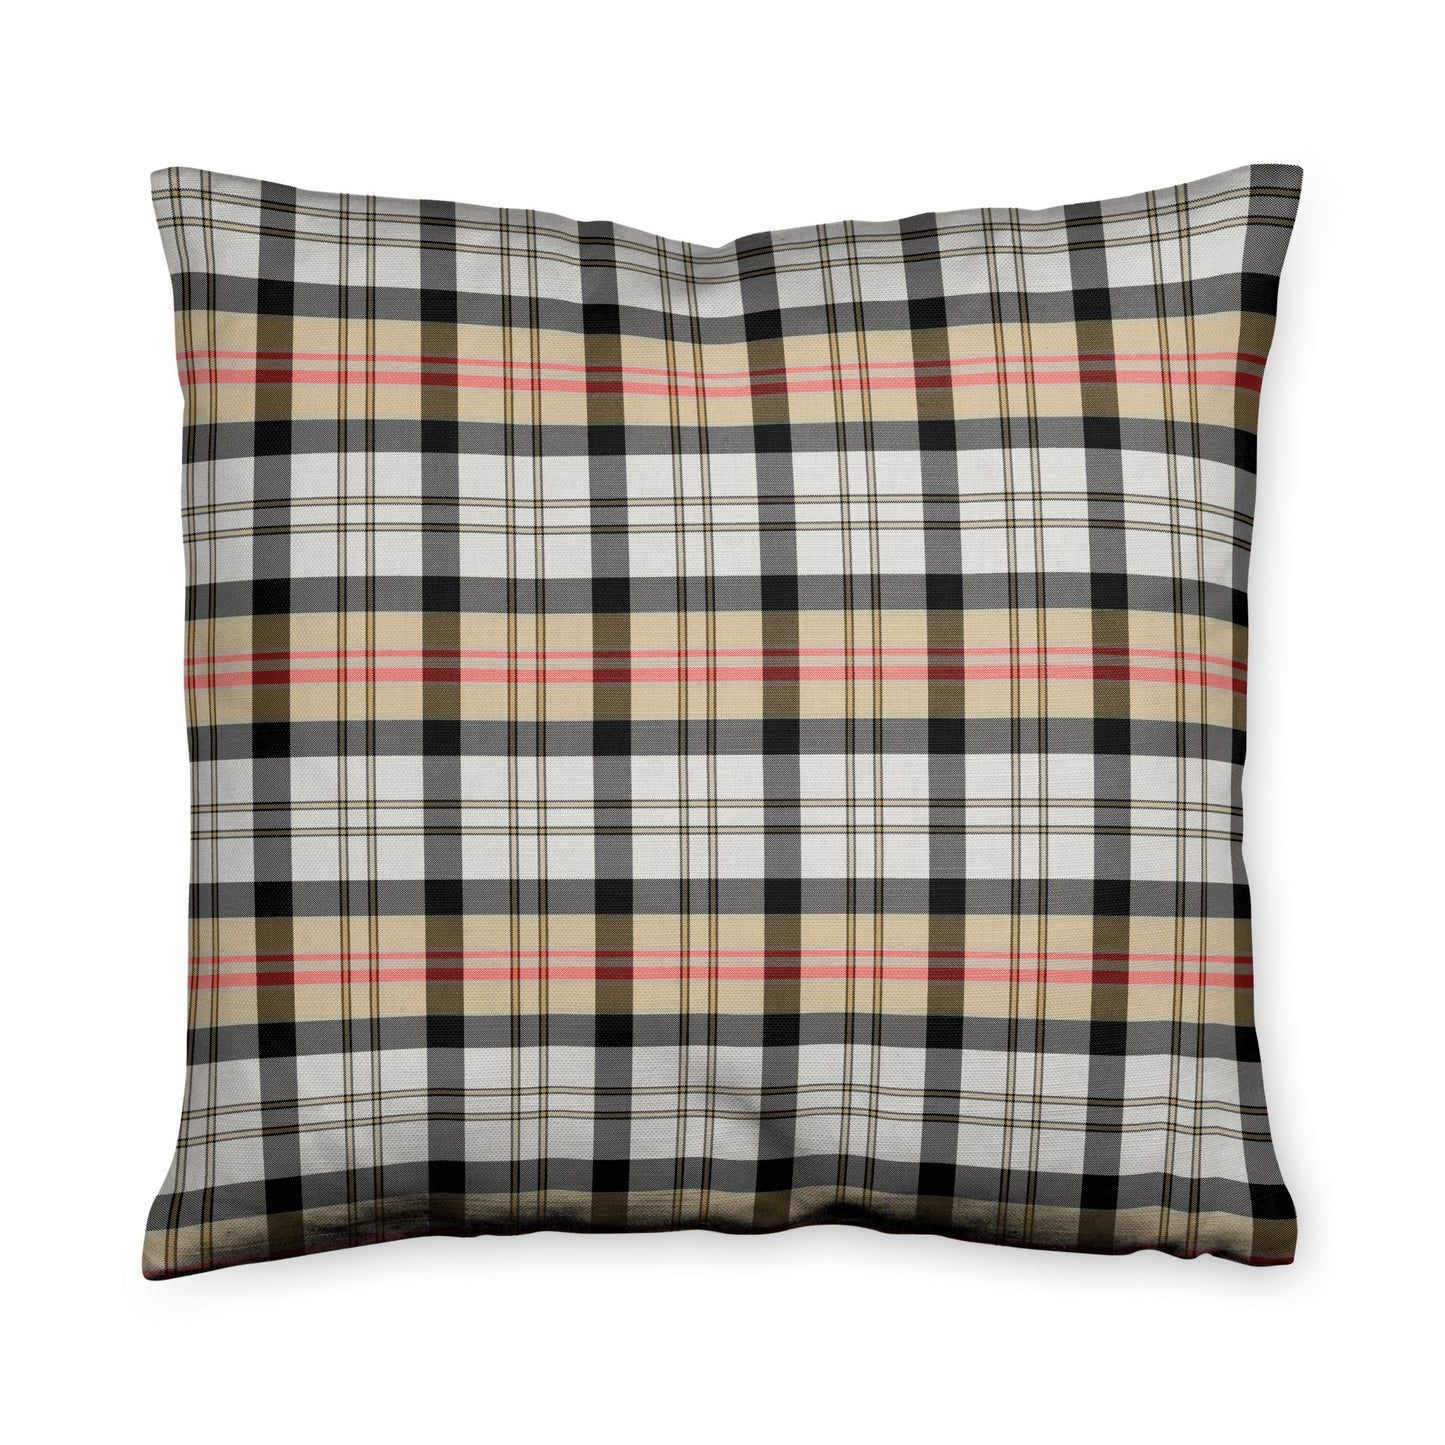 Silver and Gold Plaid Throw Pillow- shades and stripes of yellow, gold, cream, red, and black